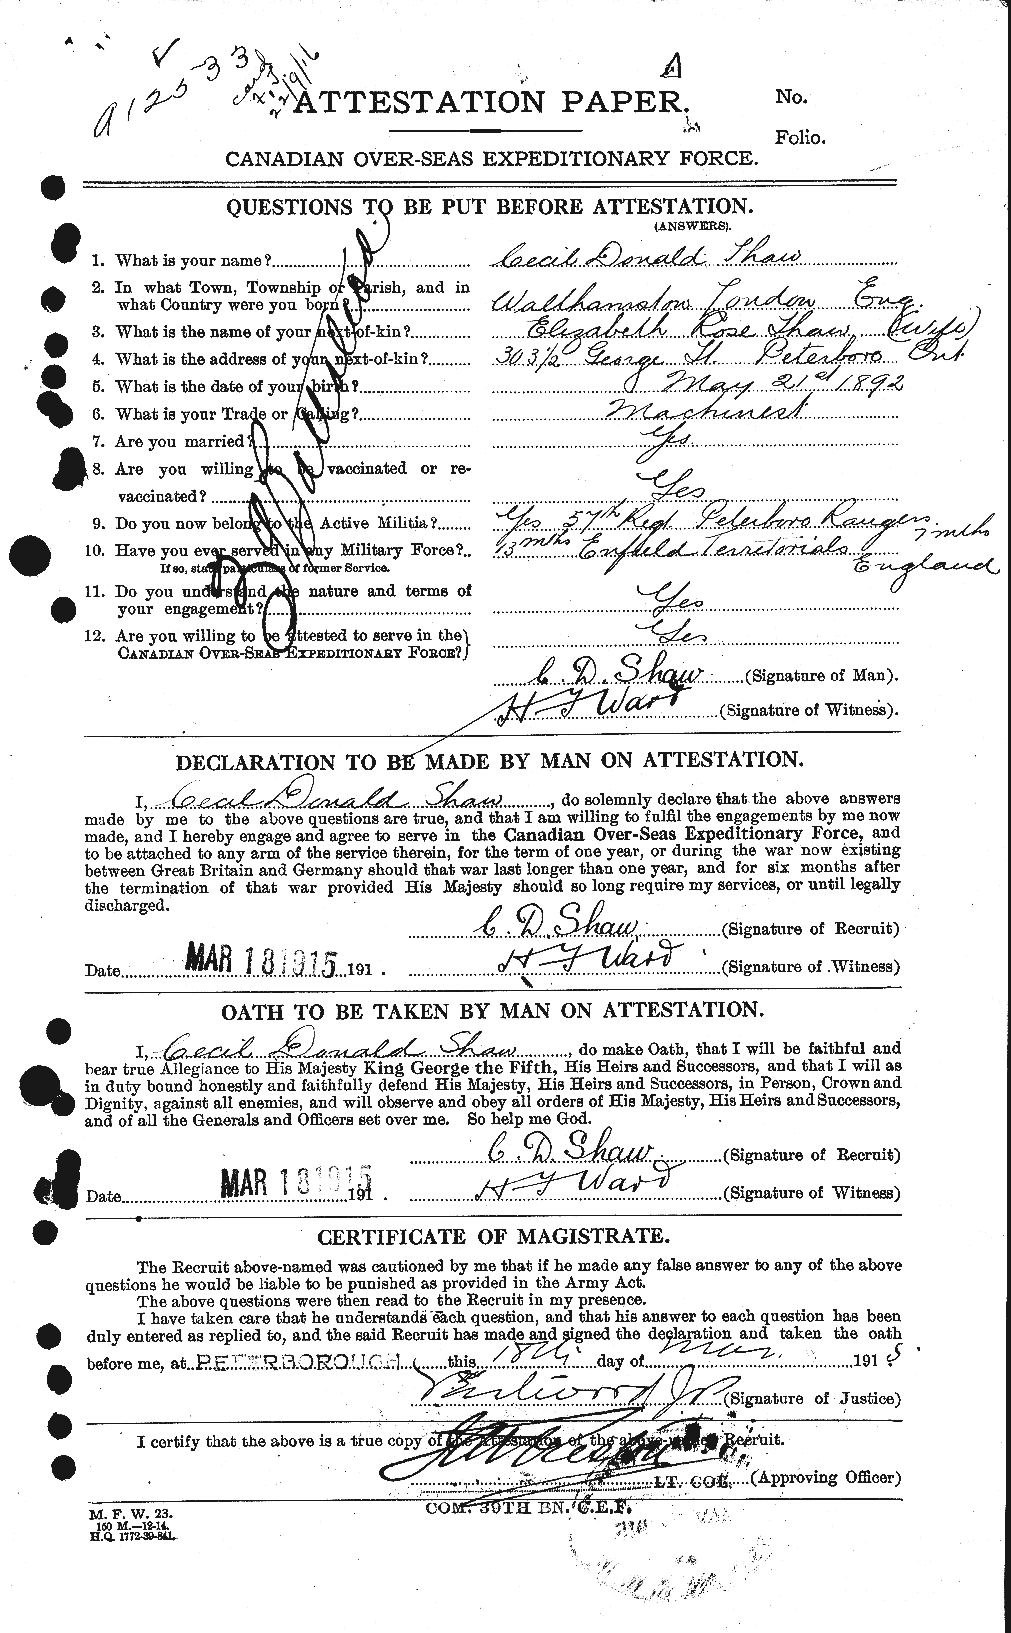 Personnel Records of the First World War - CEF 093213a